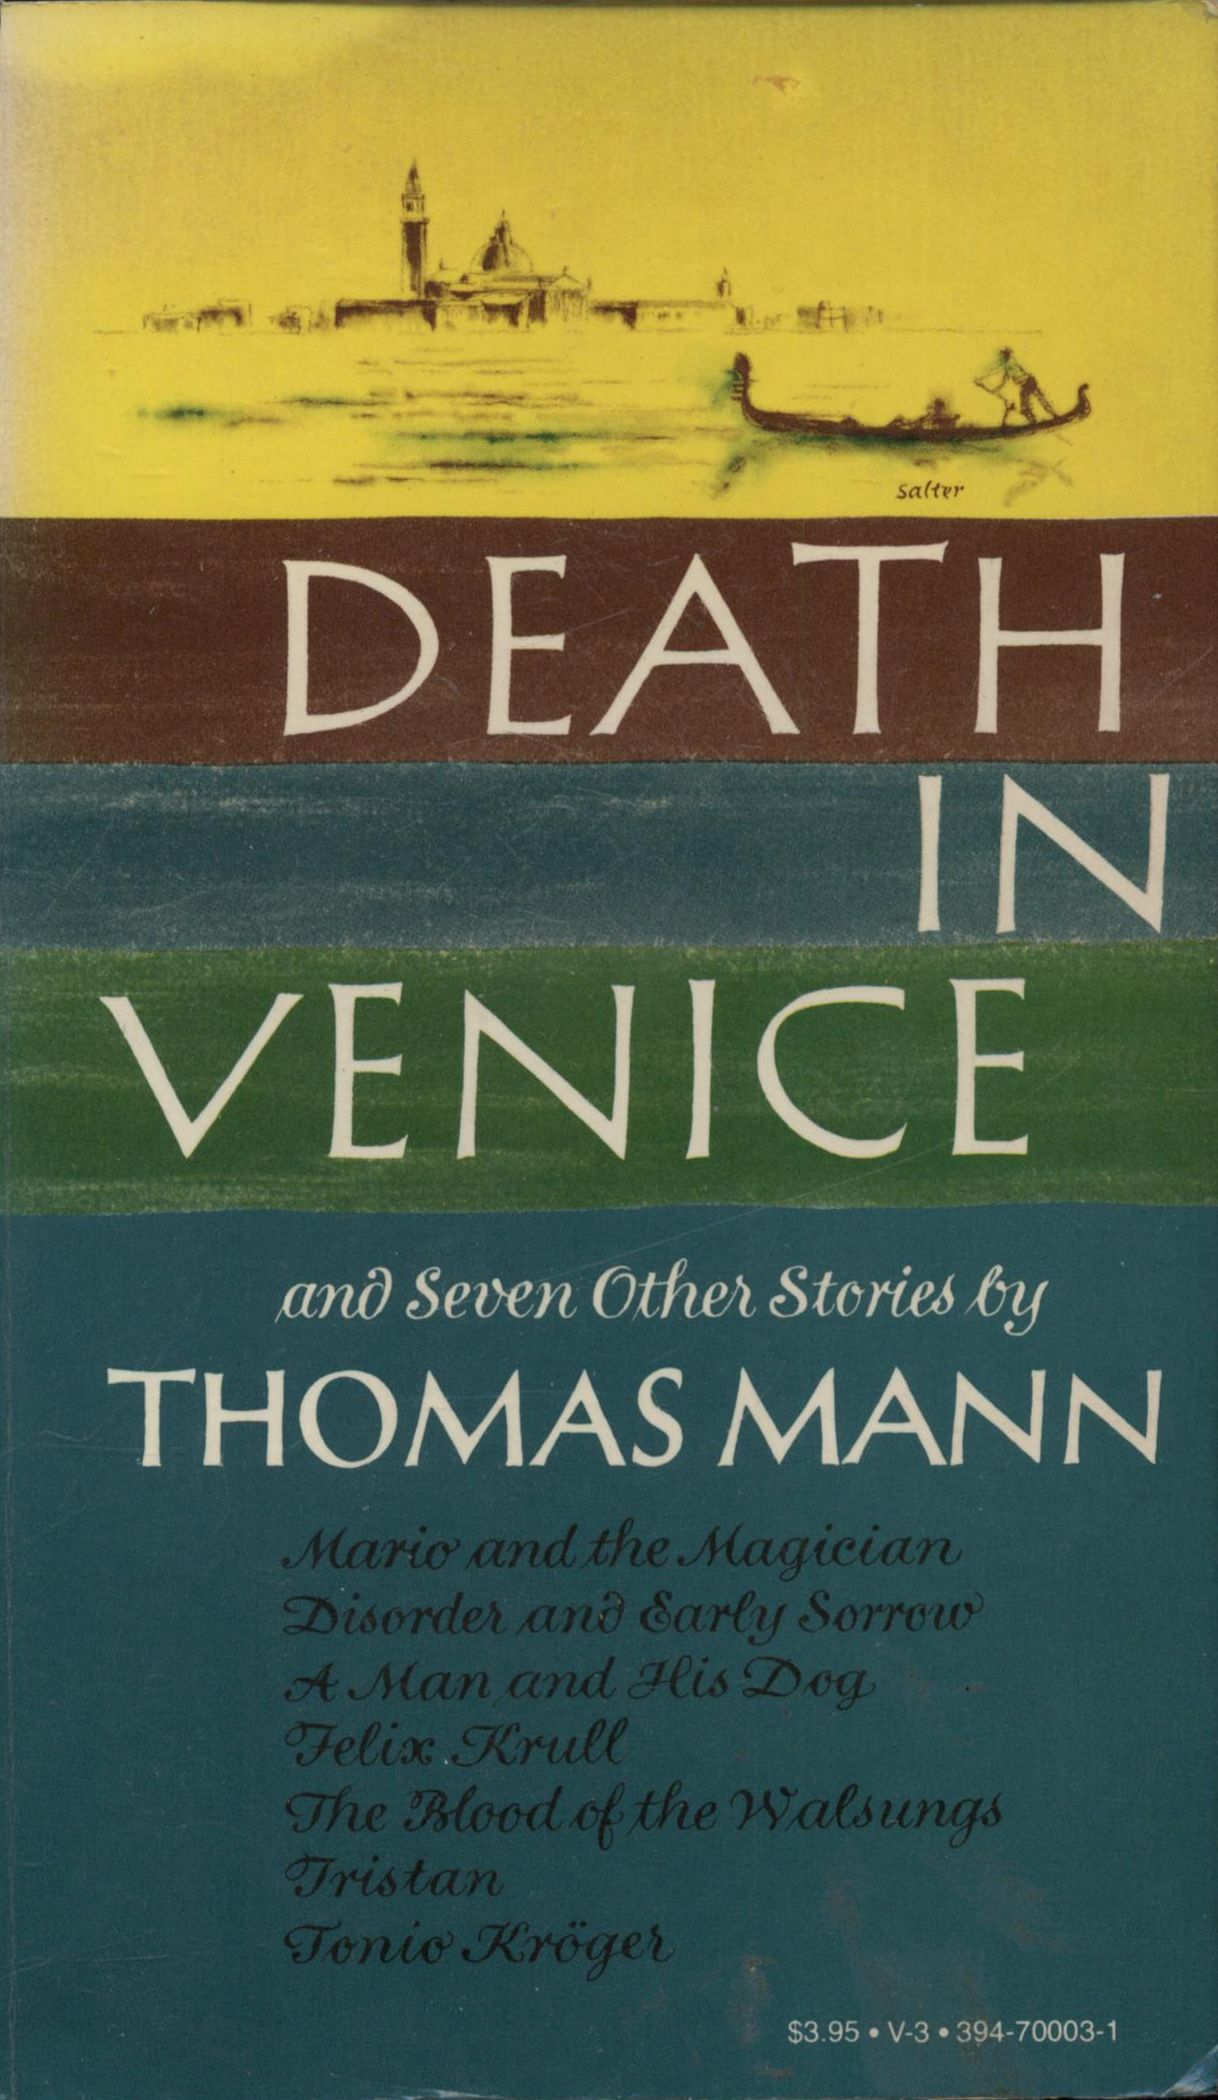 The Distributed Proofreaders Canada eBook of Death in Venice and Seven Other Stories by Thomas Mann